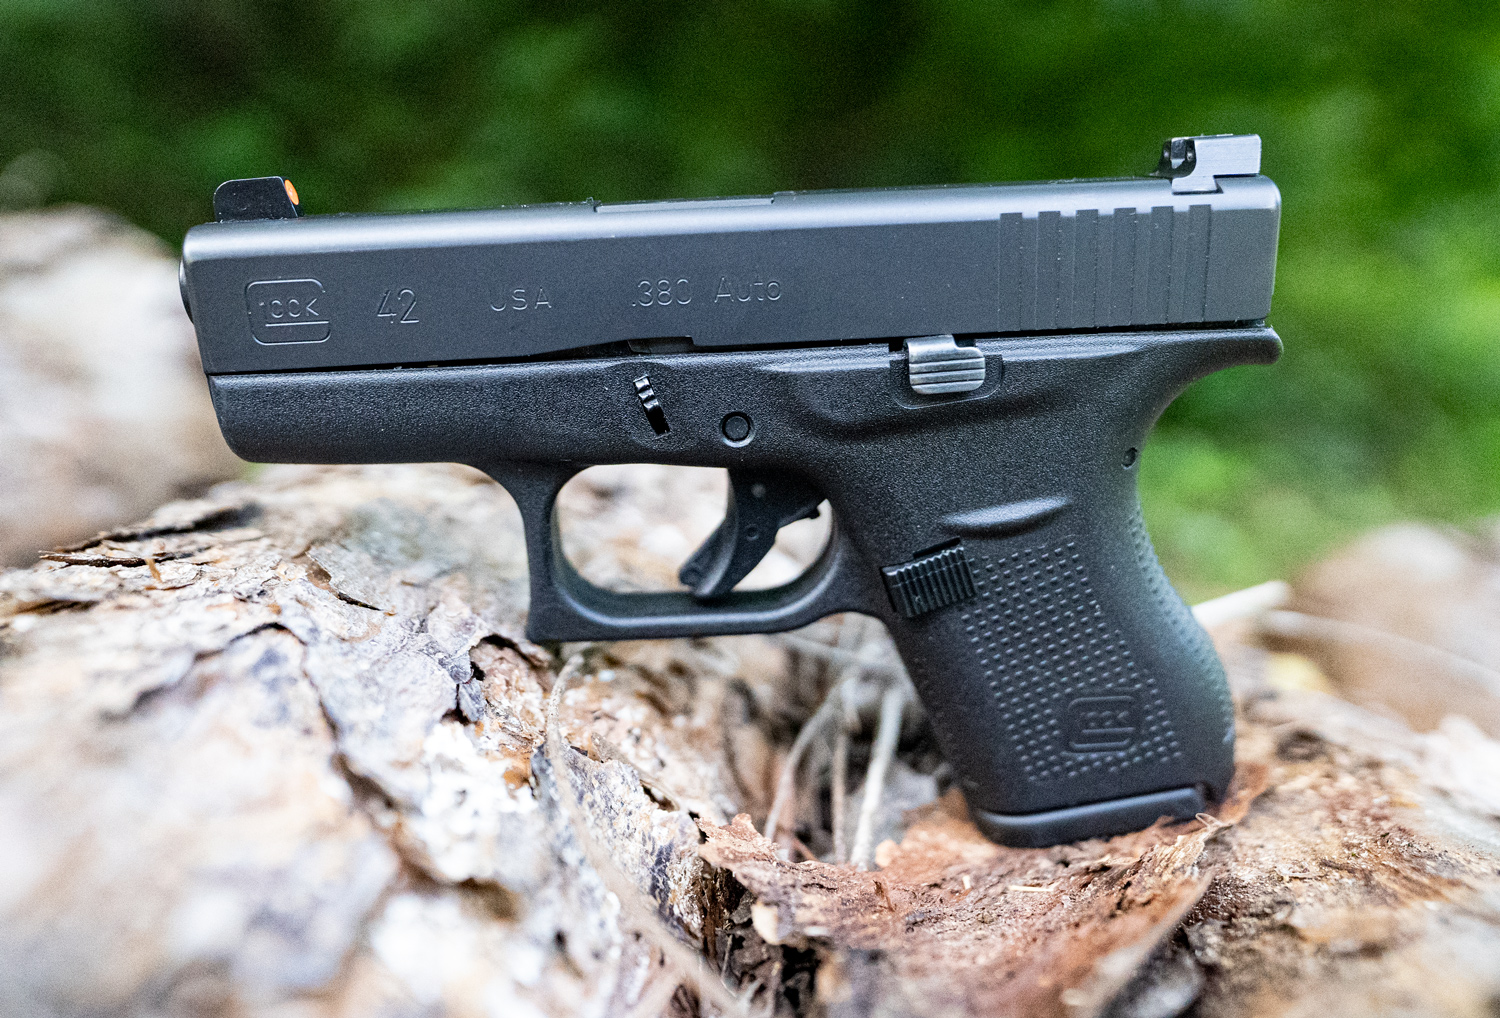 The tiny Glock 42 is a great concealed carry option